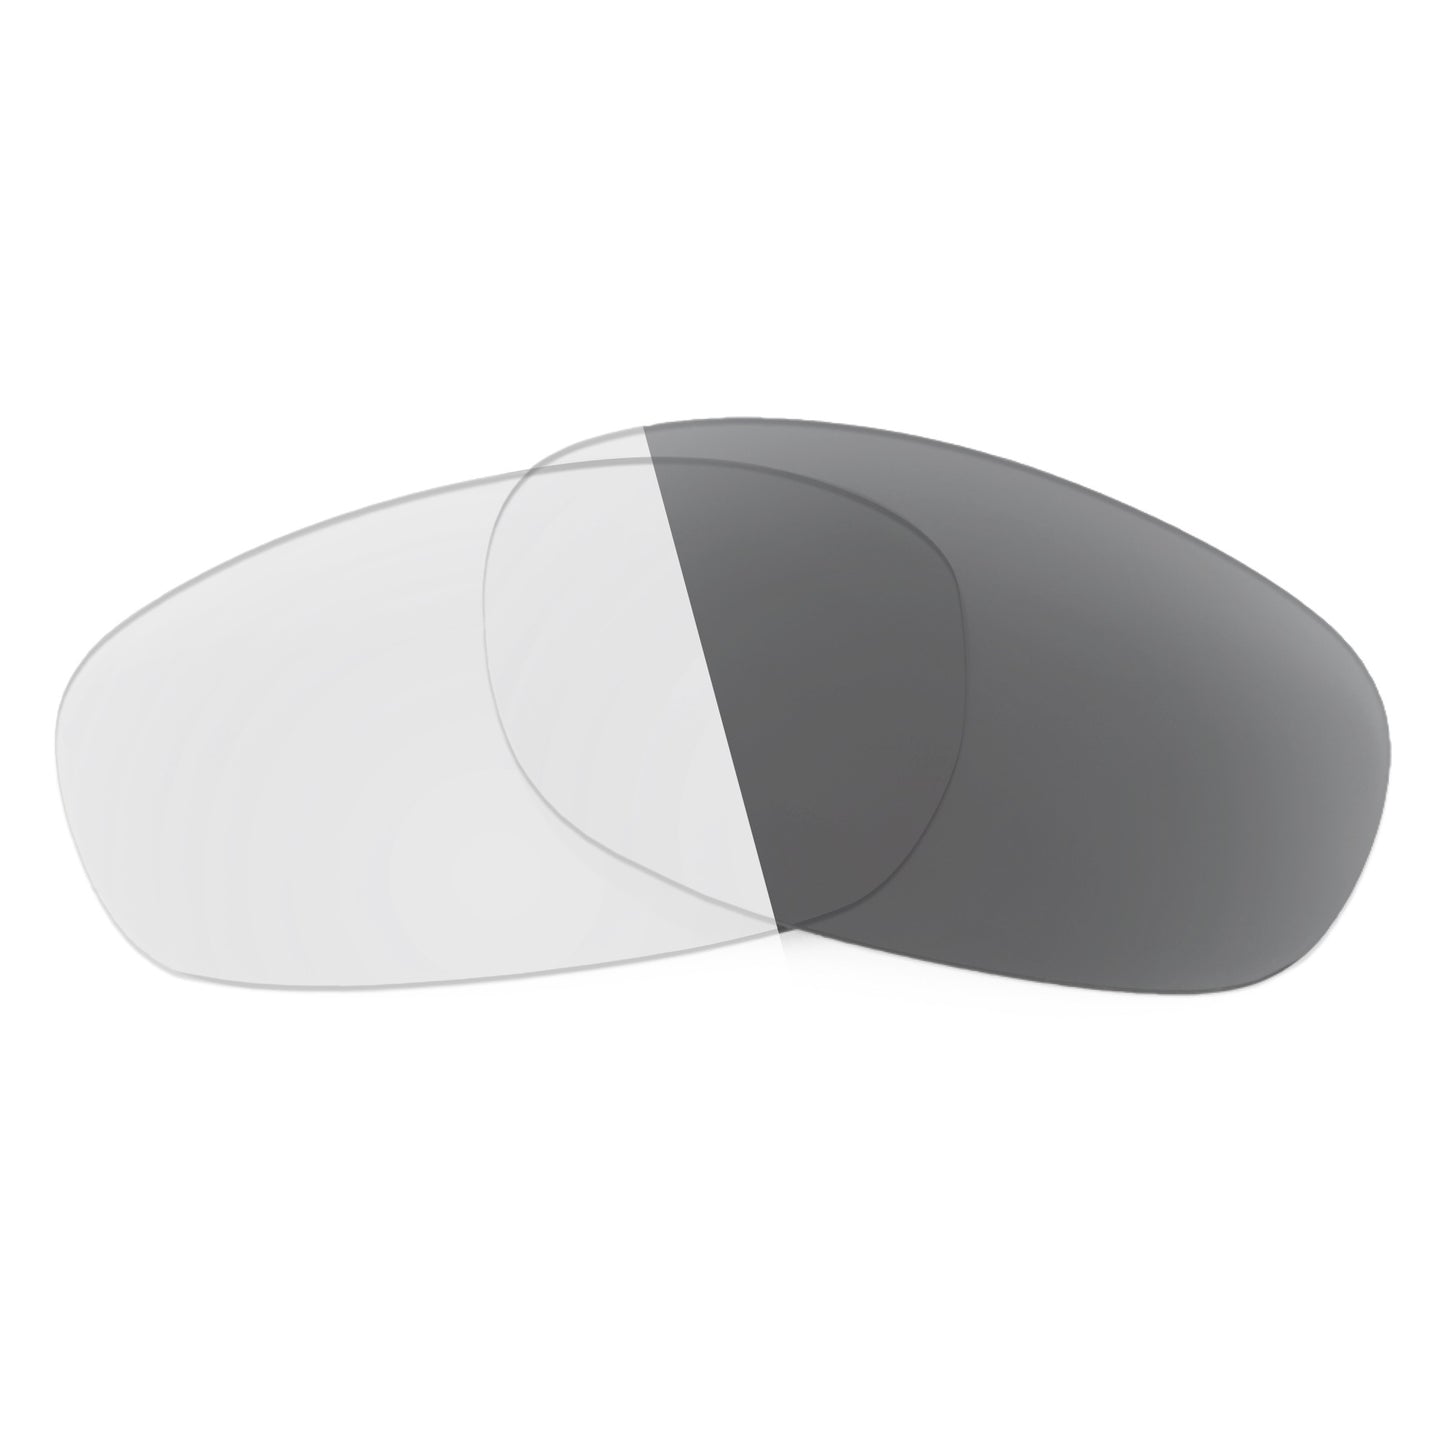 Revant replacement lenses for Ray-Ban RB4124 63mm Non-Polarized Adapt Gray Photochromic